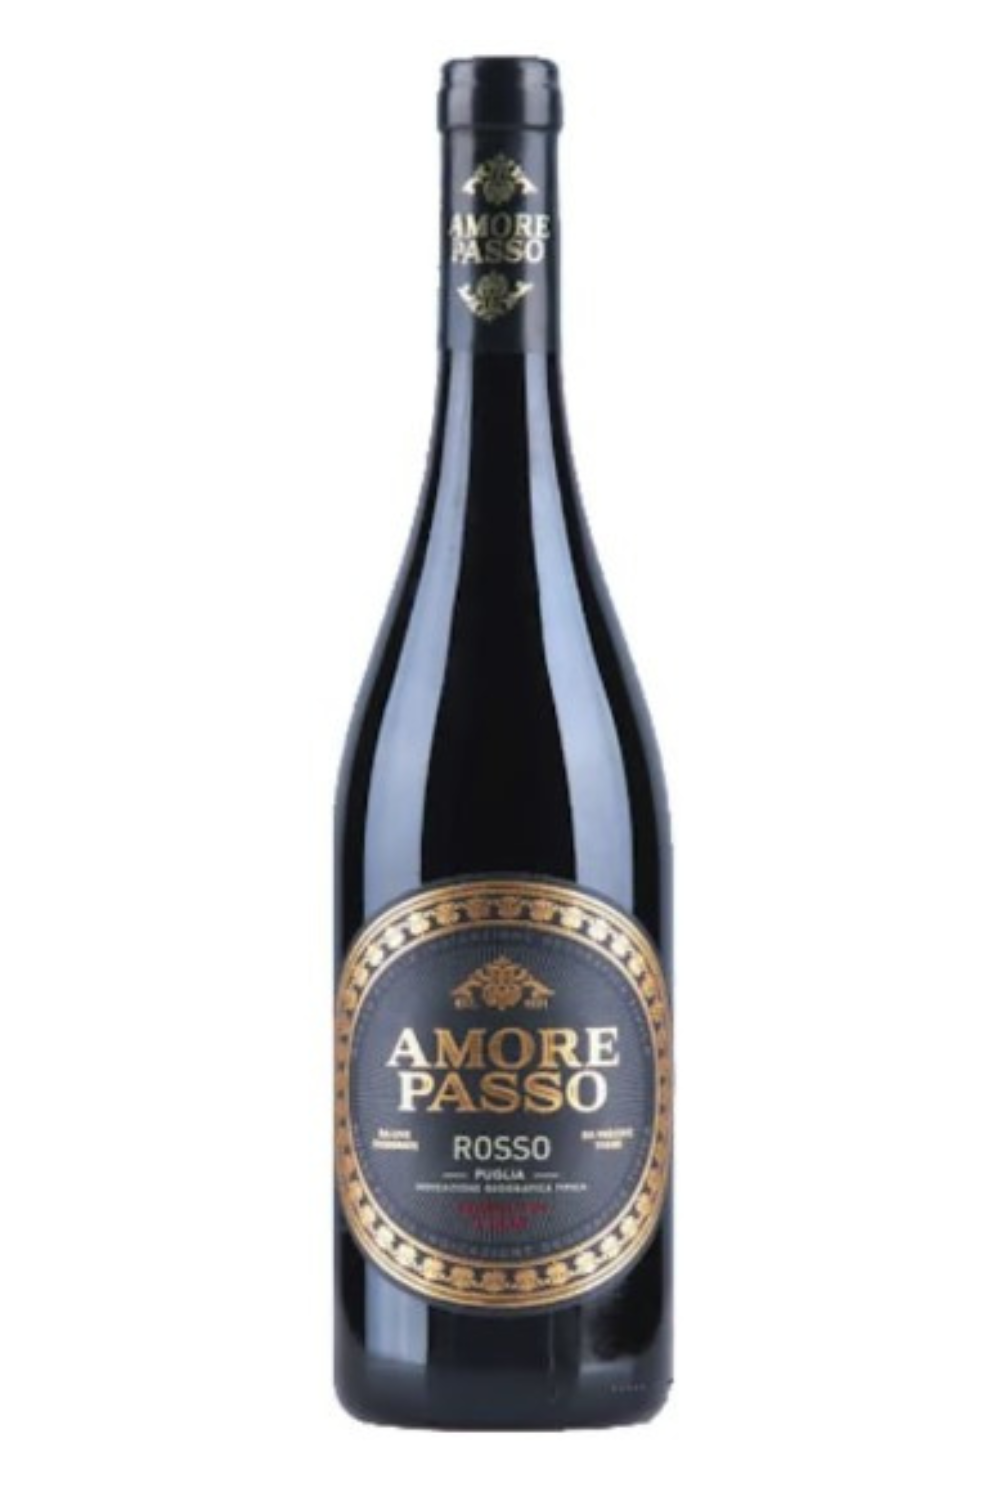 Amore Passo Rosso IGT 750ml